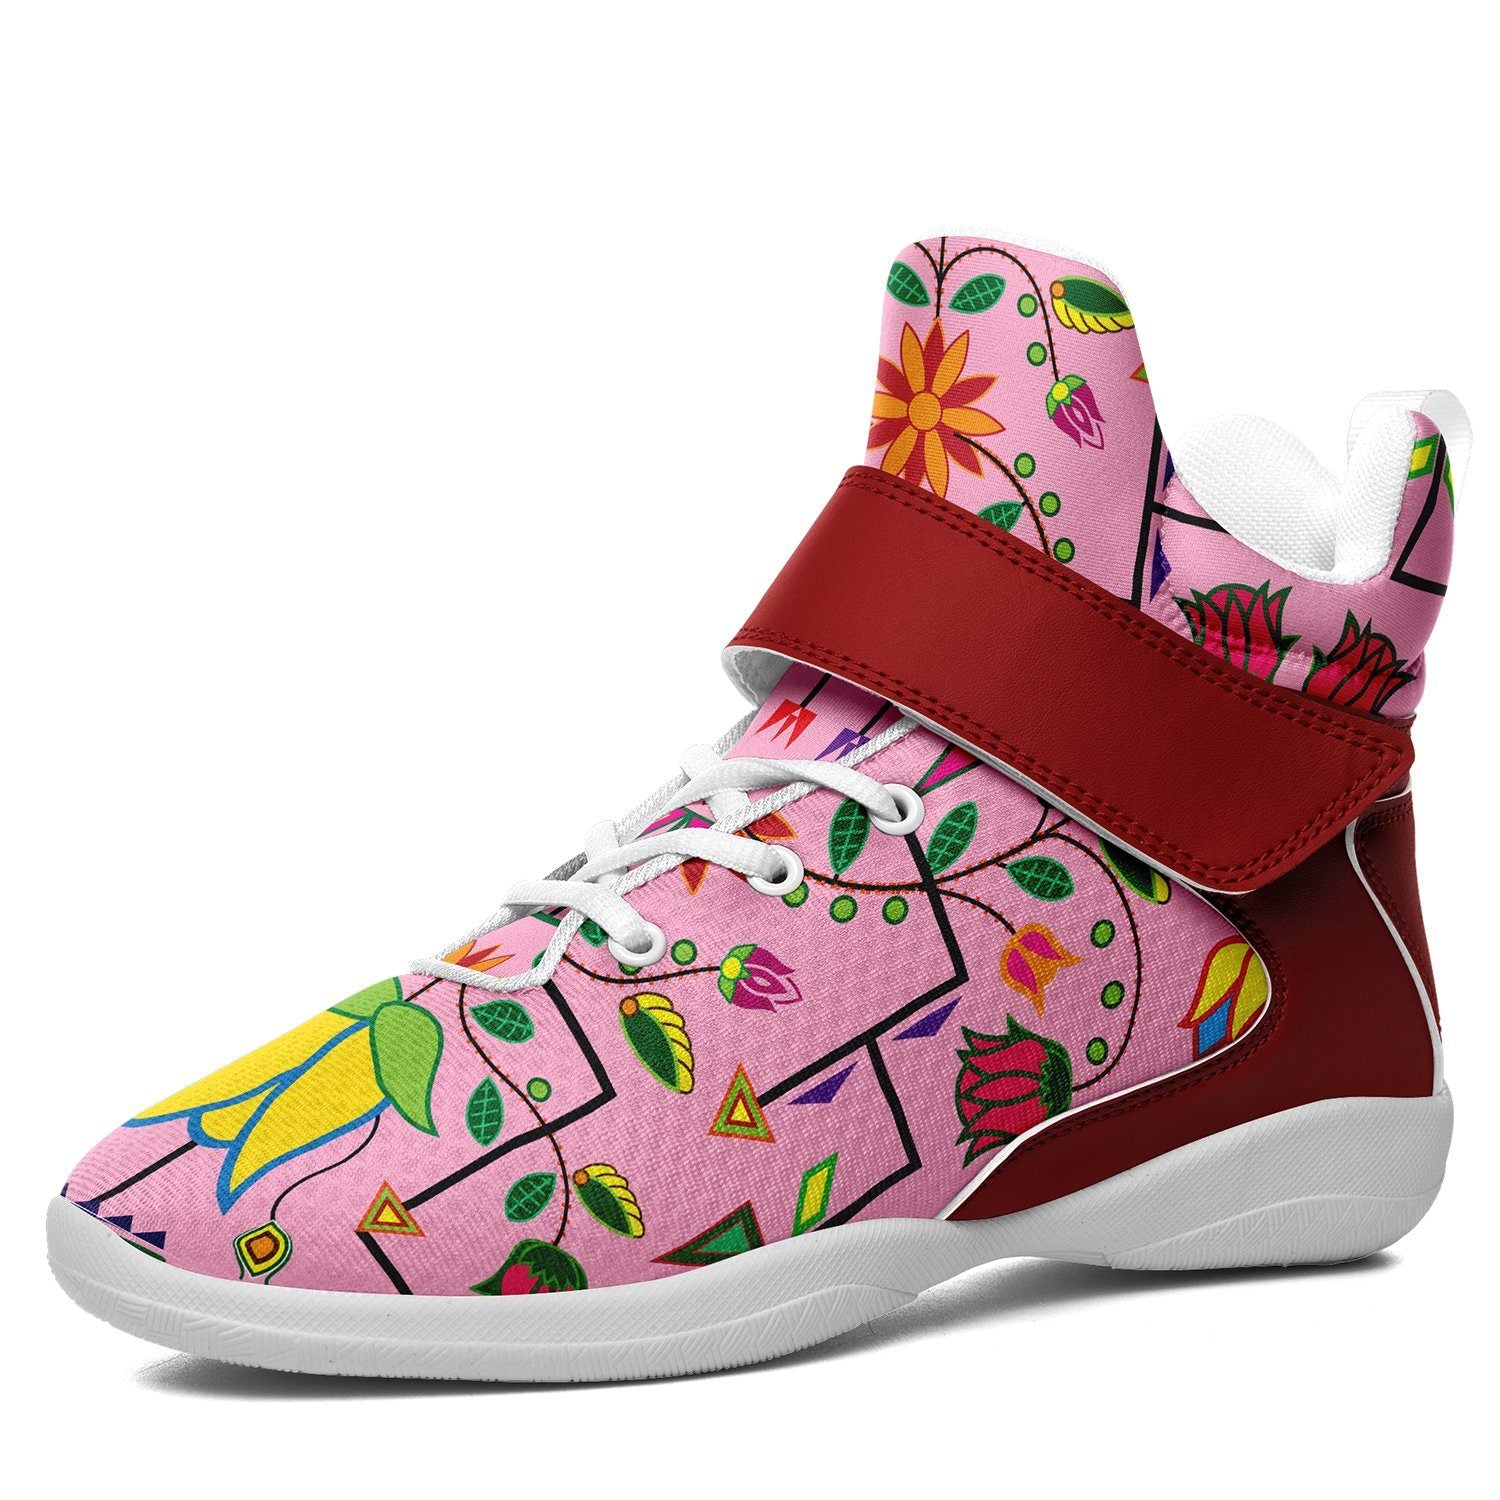 Geometric Floral Summer Sunset Kid's Ipottaa Basketball / Sport High Top Shoes 49 Dzine US Women 4.5 / US Youth 3.5 / EUR 35 White Sole with Dark Red Strap 